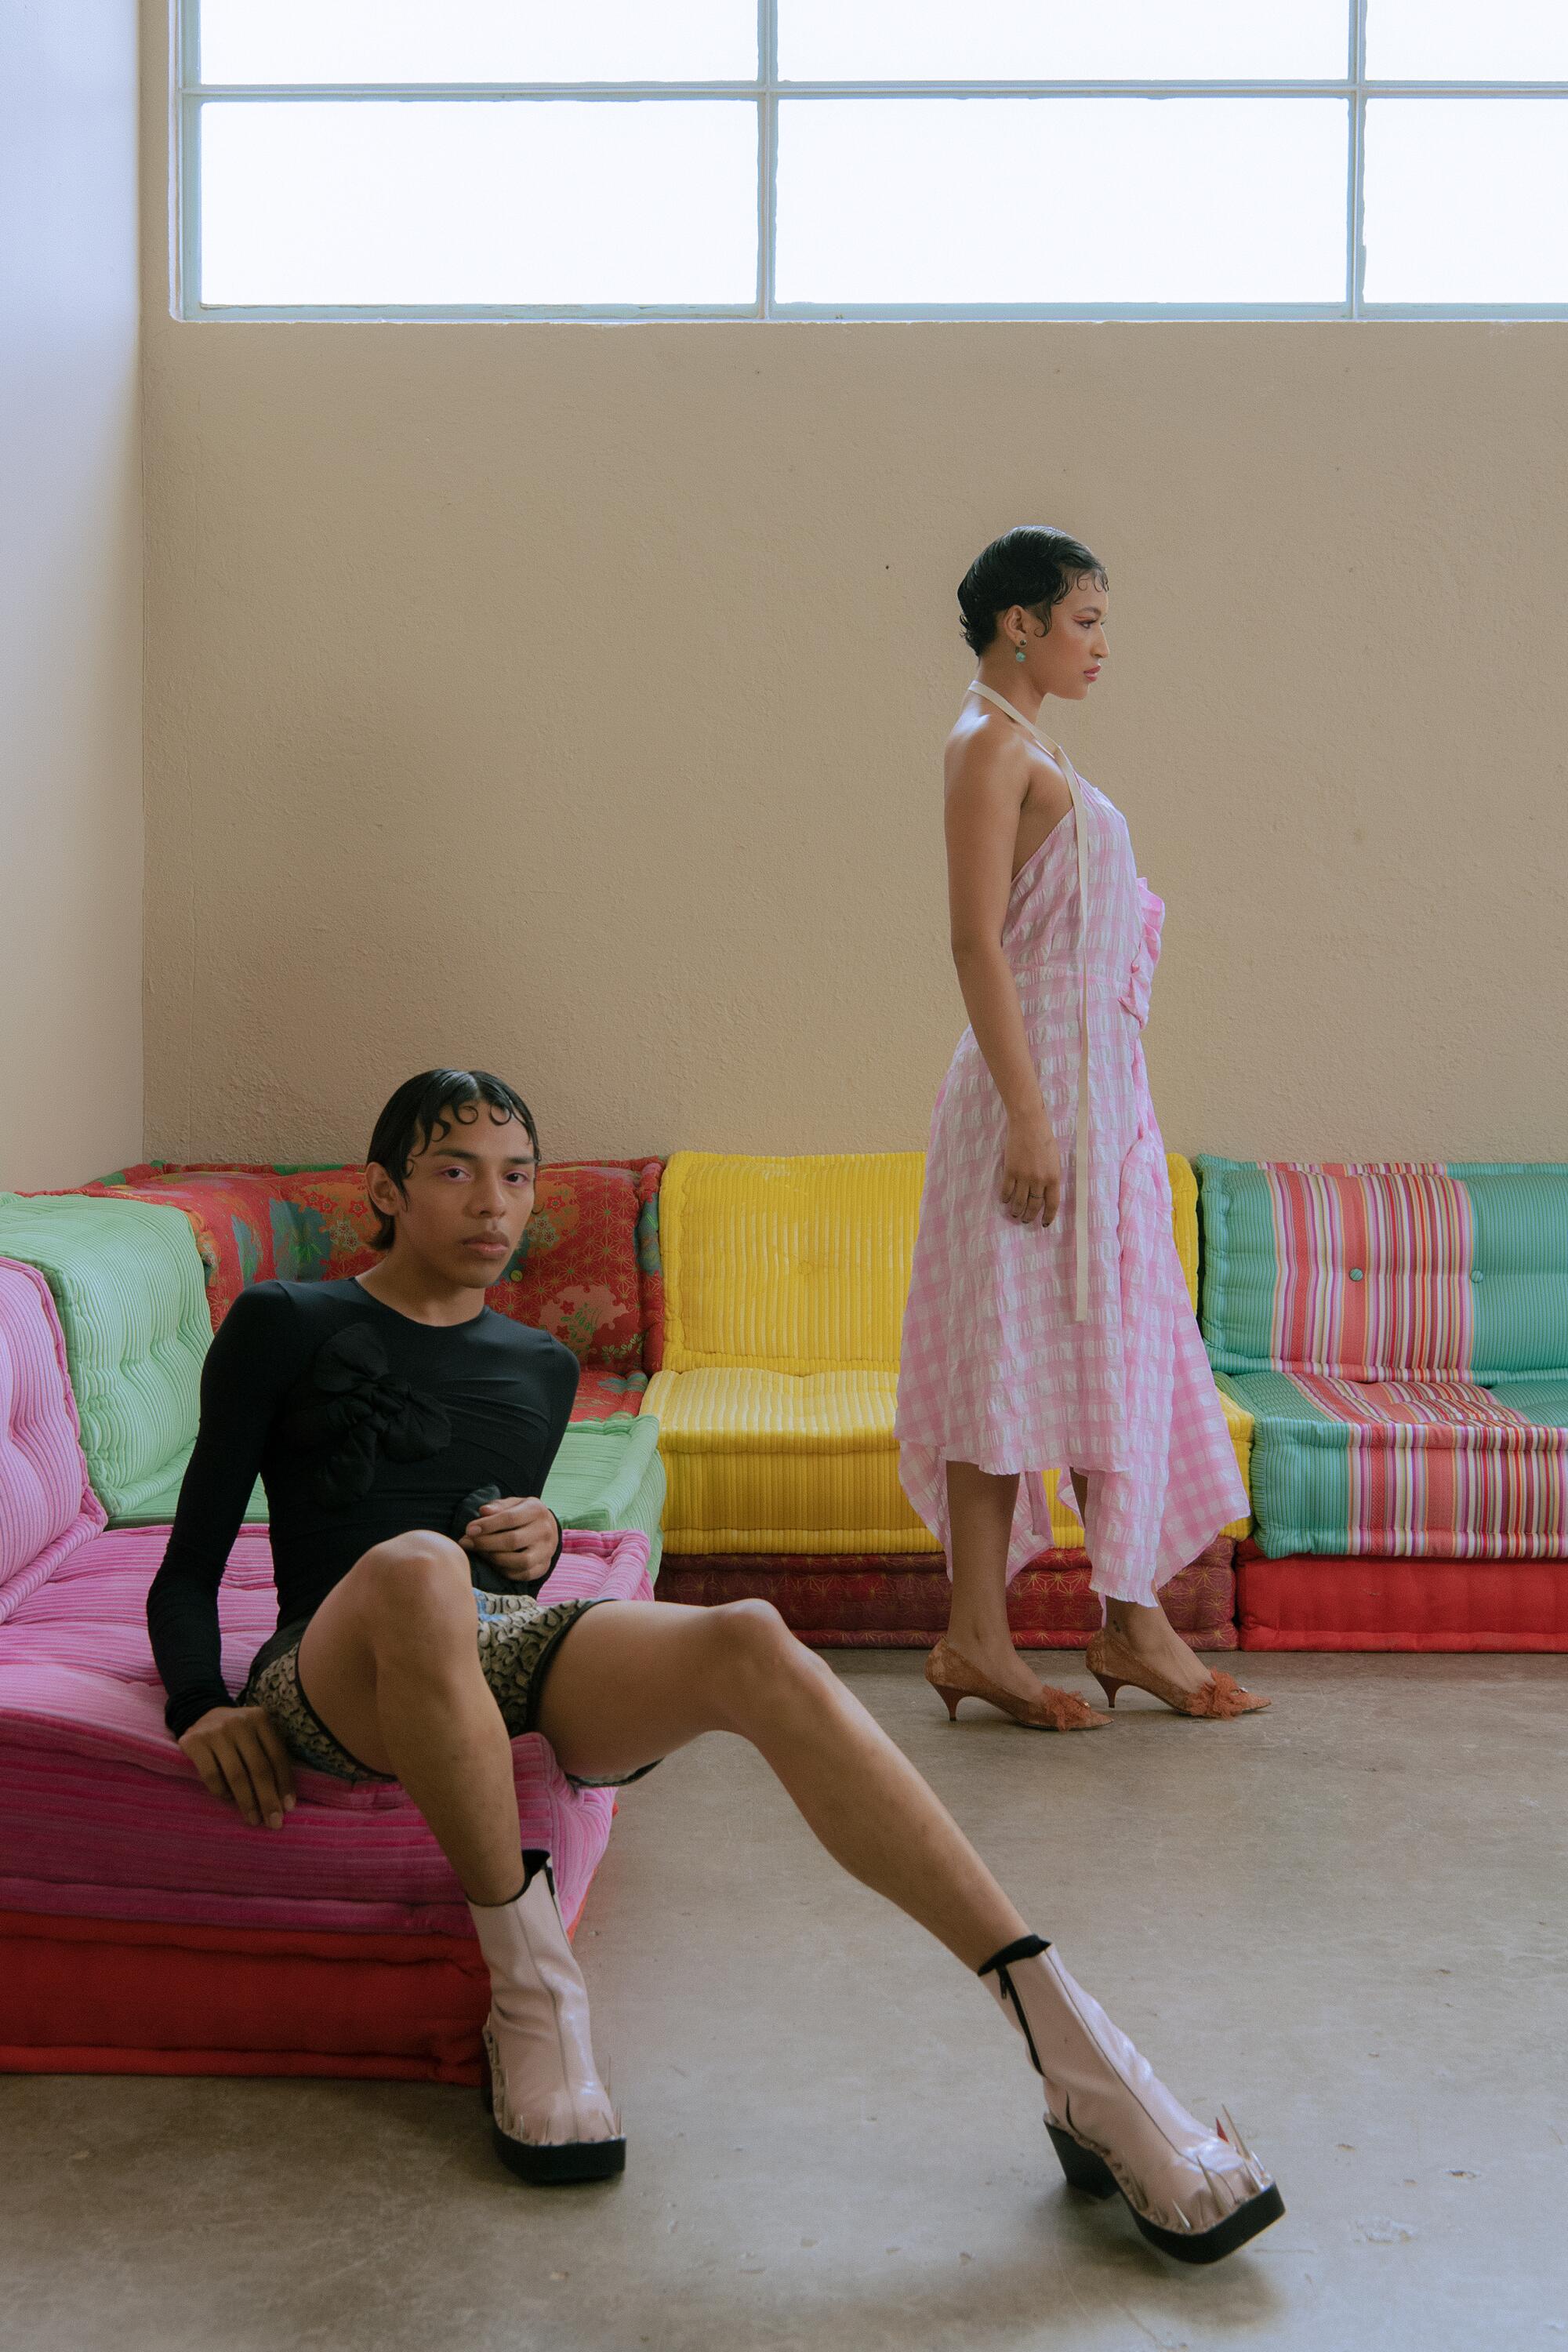 One model sits on a multi-colored, V-shaped couch, while another model stands in a pink dress.